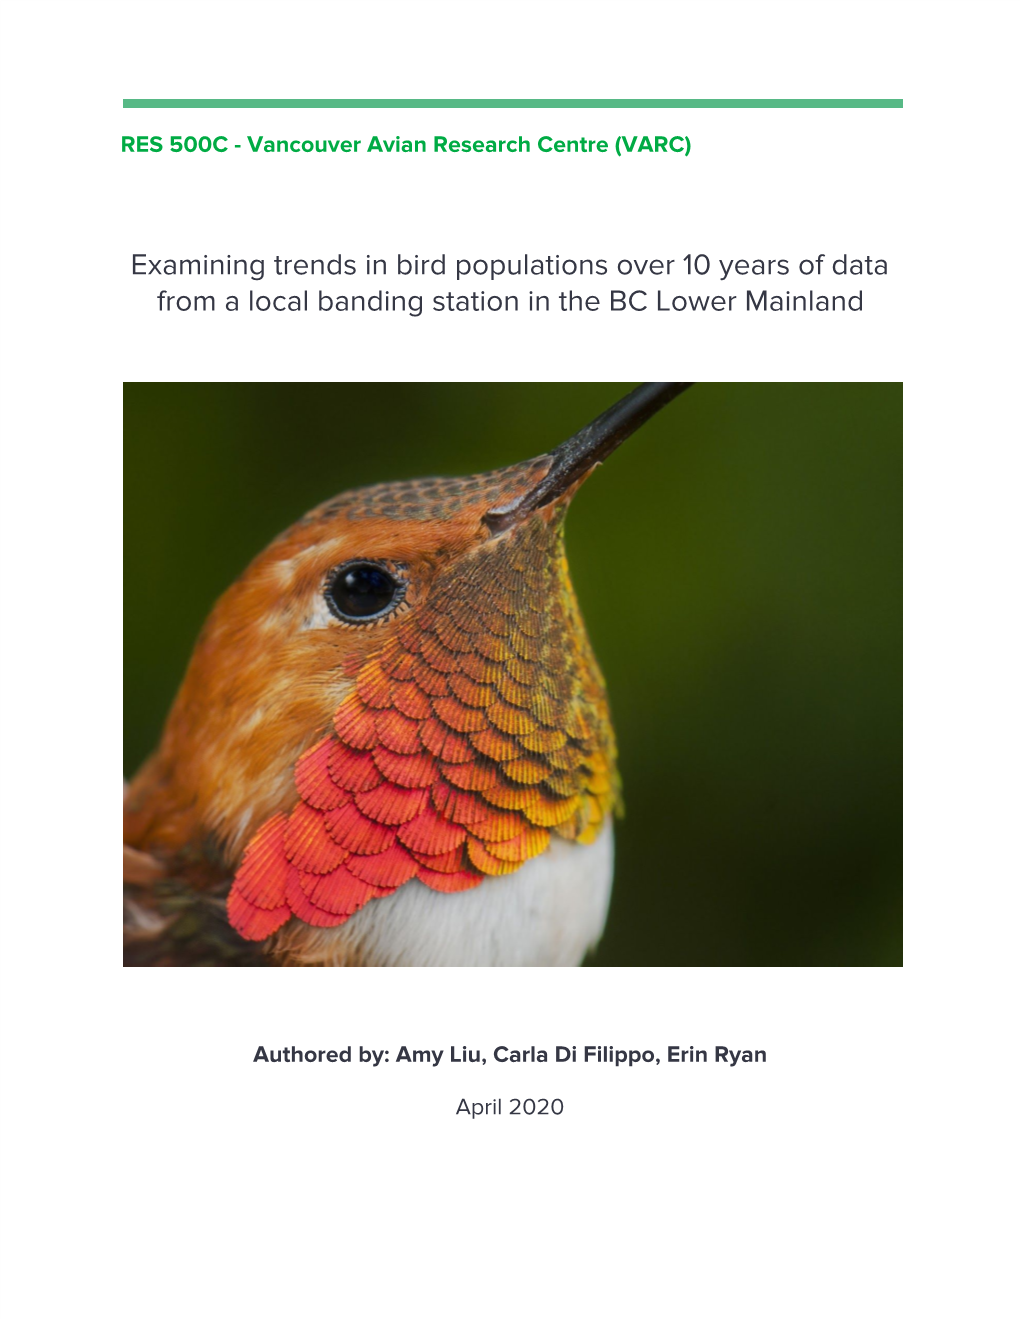 Examining Trends in Bird Populations Over 10 Years of Data from a Local Banding Station in the BC Lower Mainland